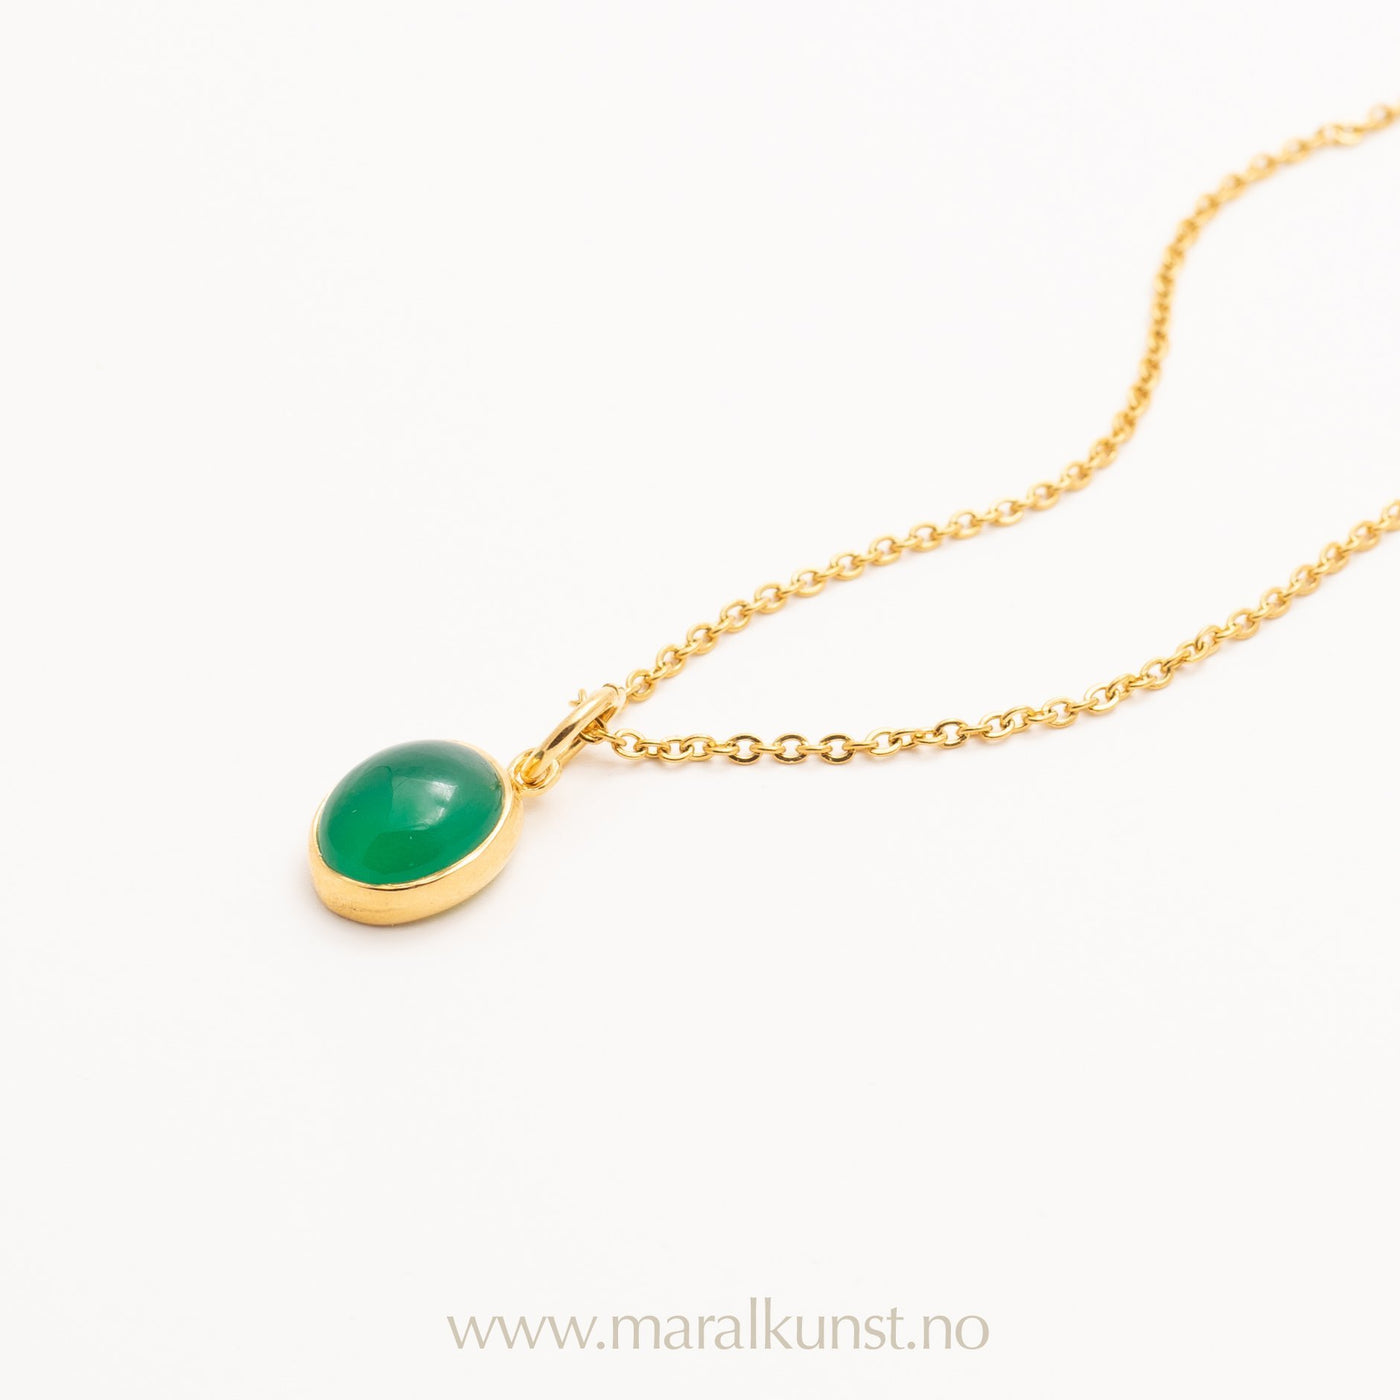 Green Onyx Silver Necklace - Maral Kunst Jewelry